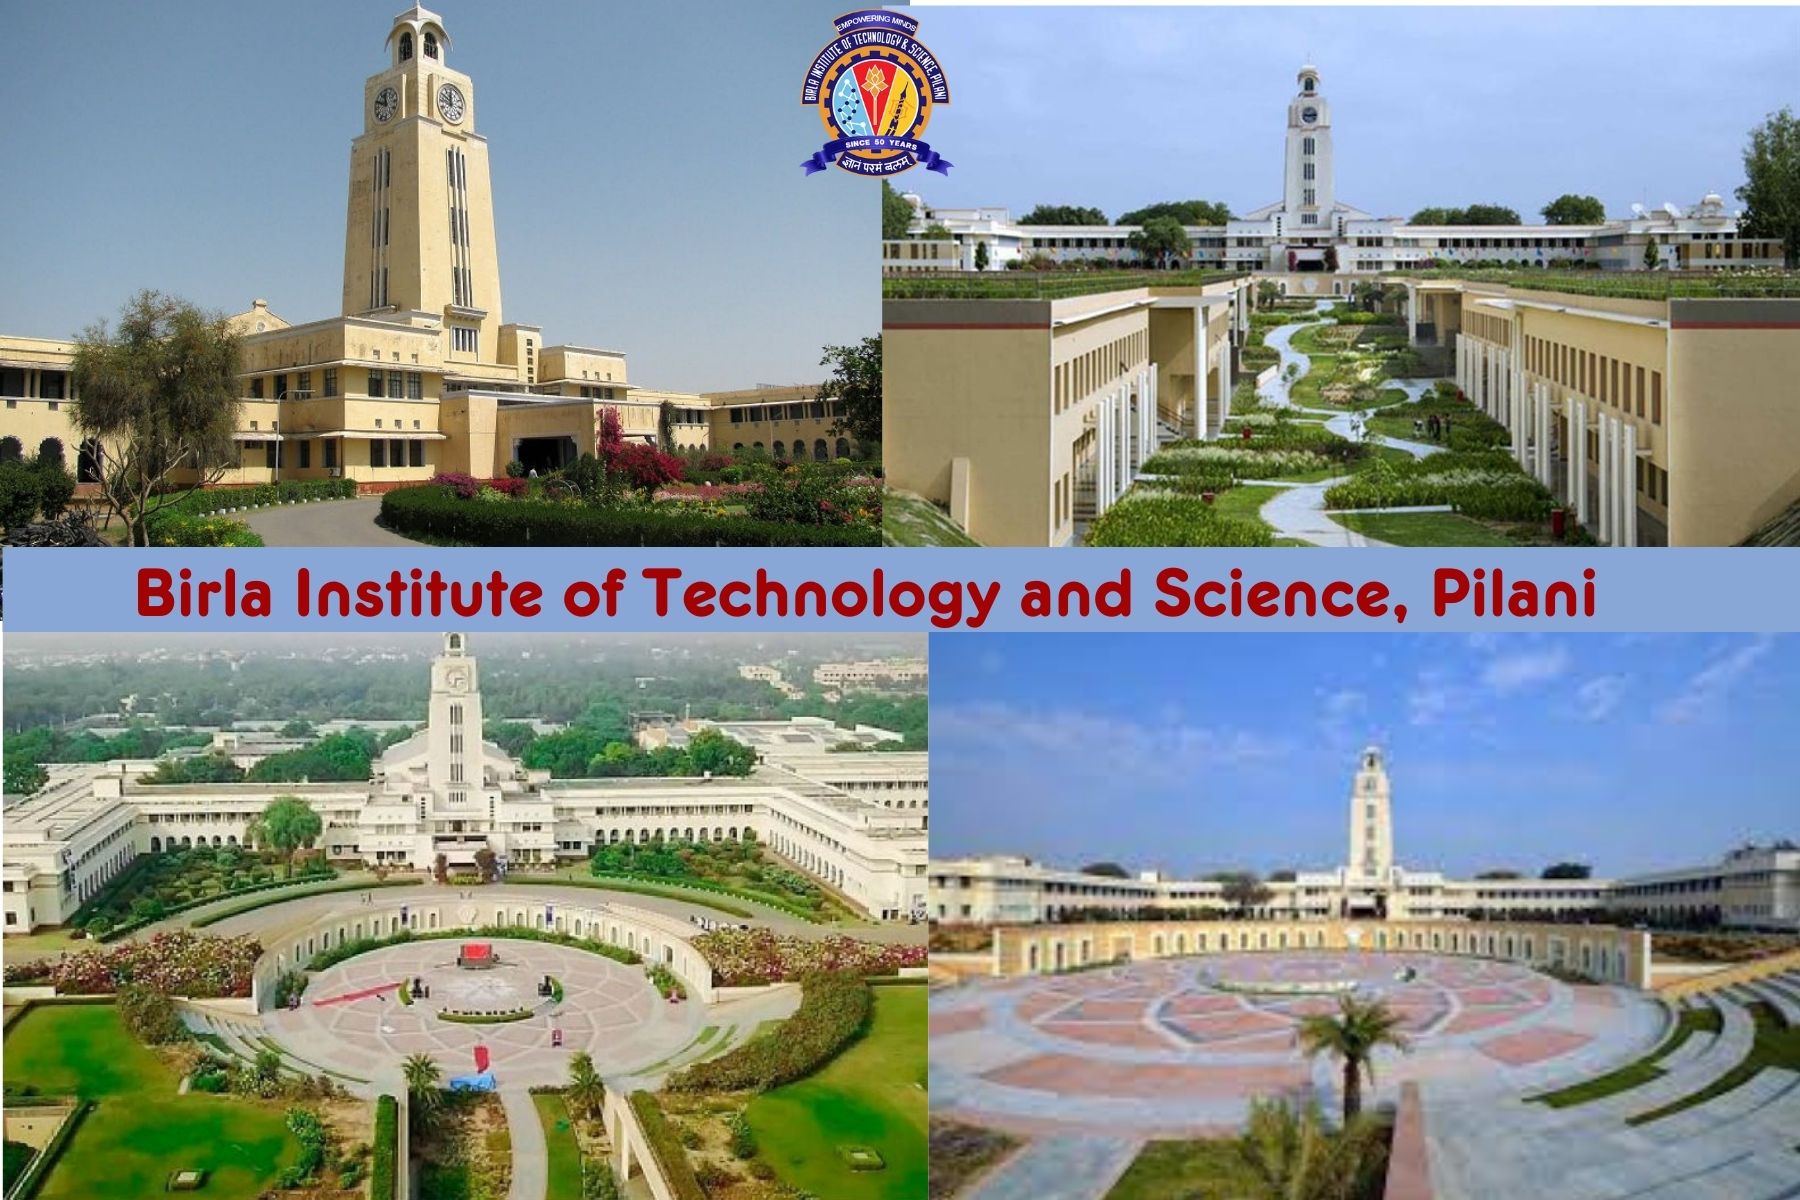 birla institute of technology and science, pilani